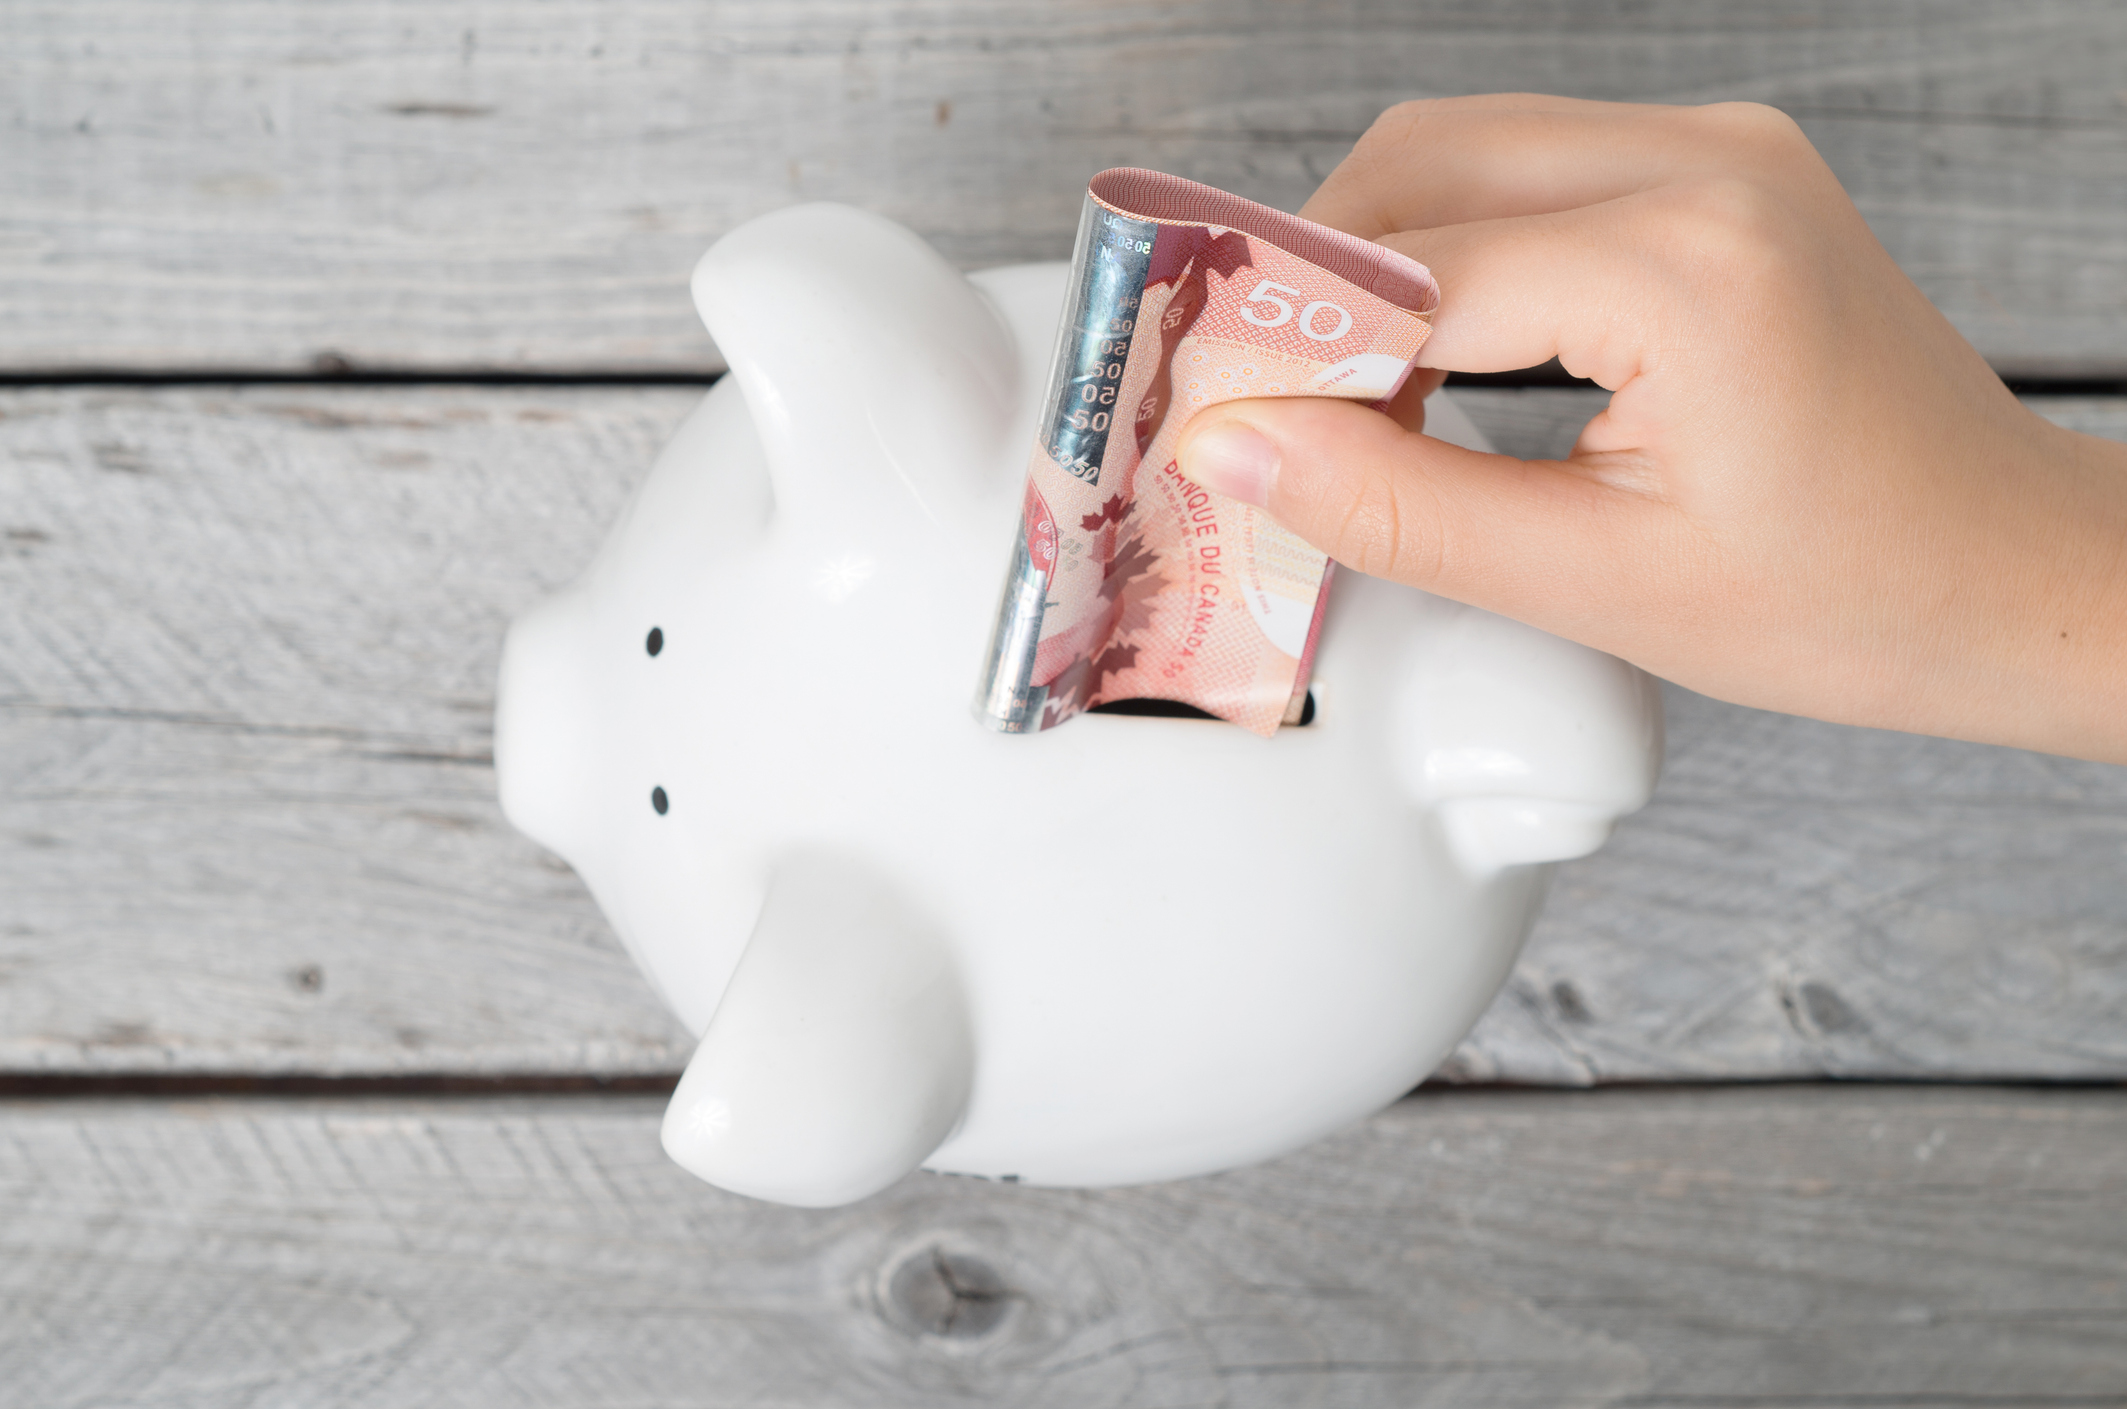 Shopping for a better savings rate? Where to look and what to consider